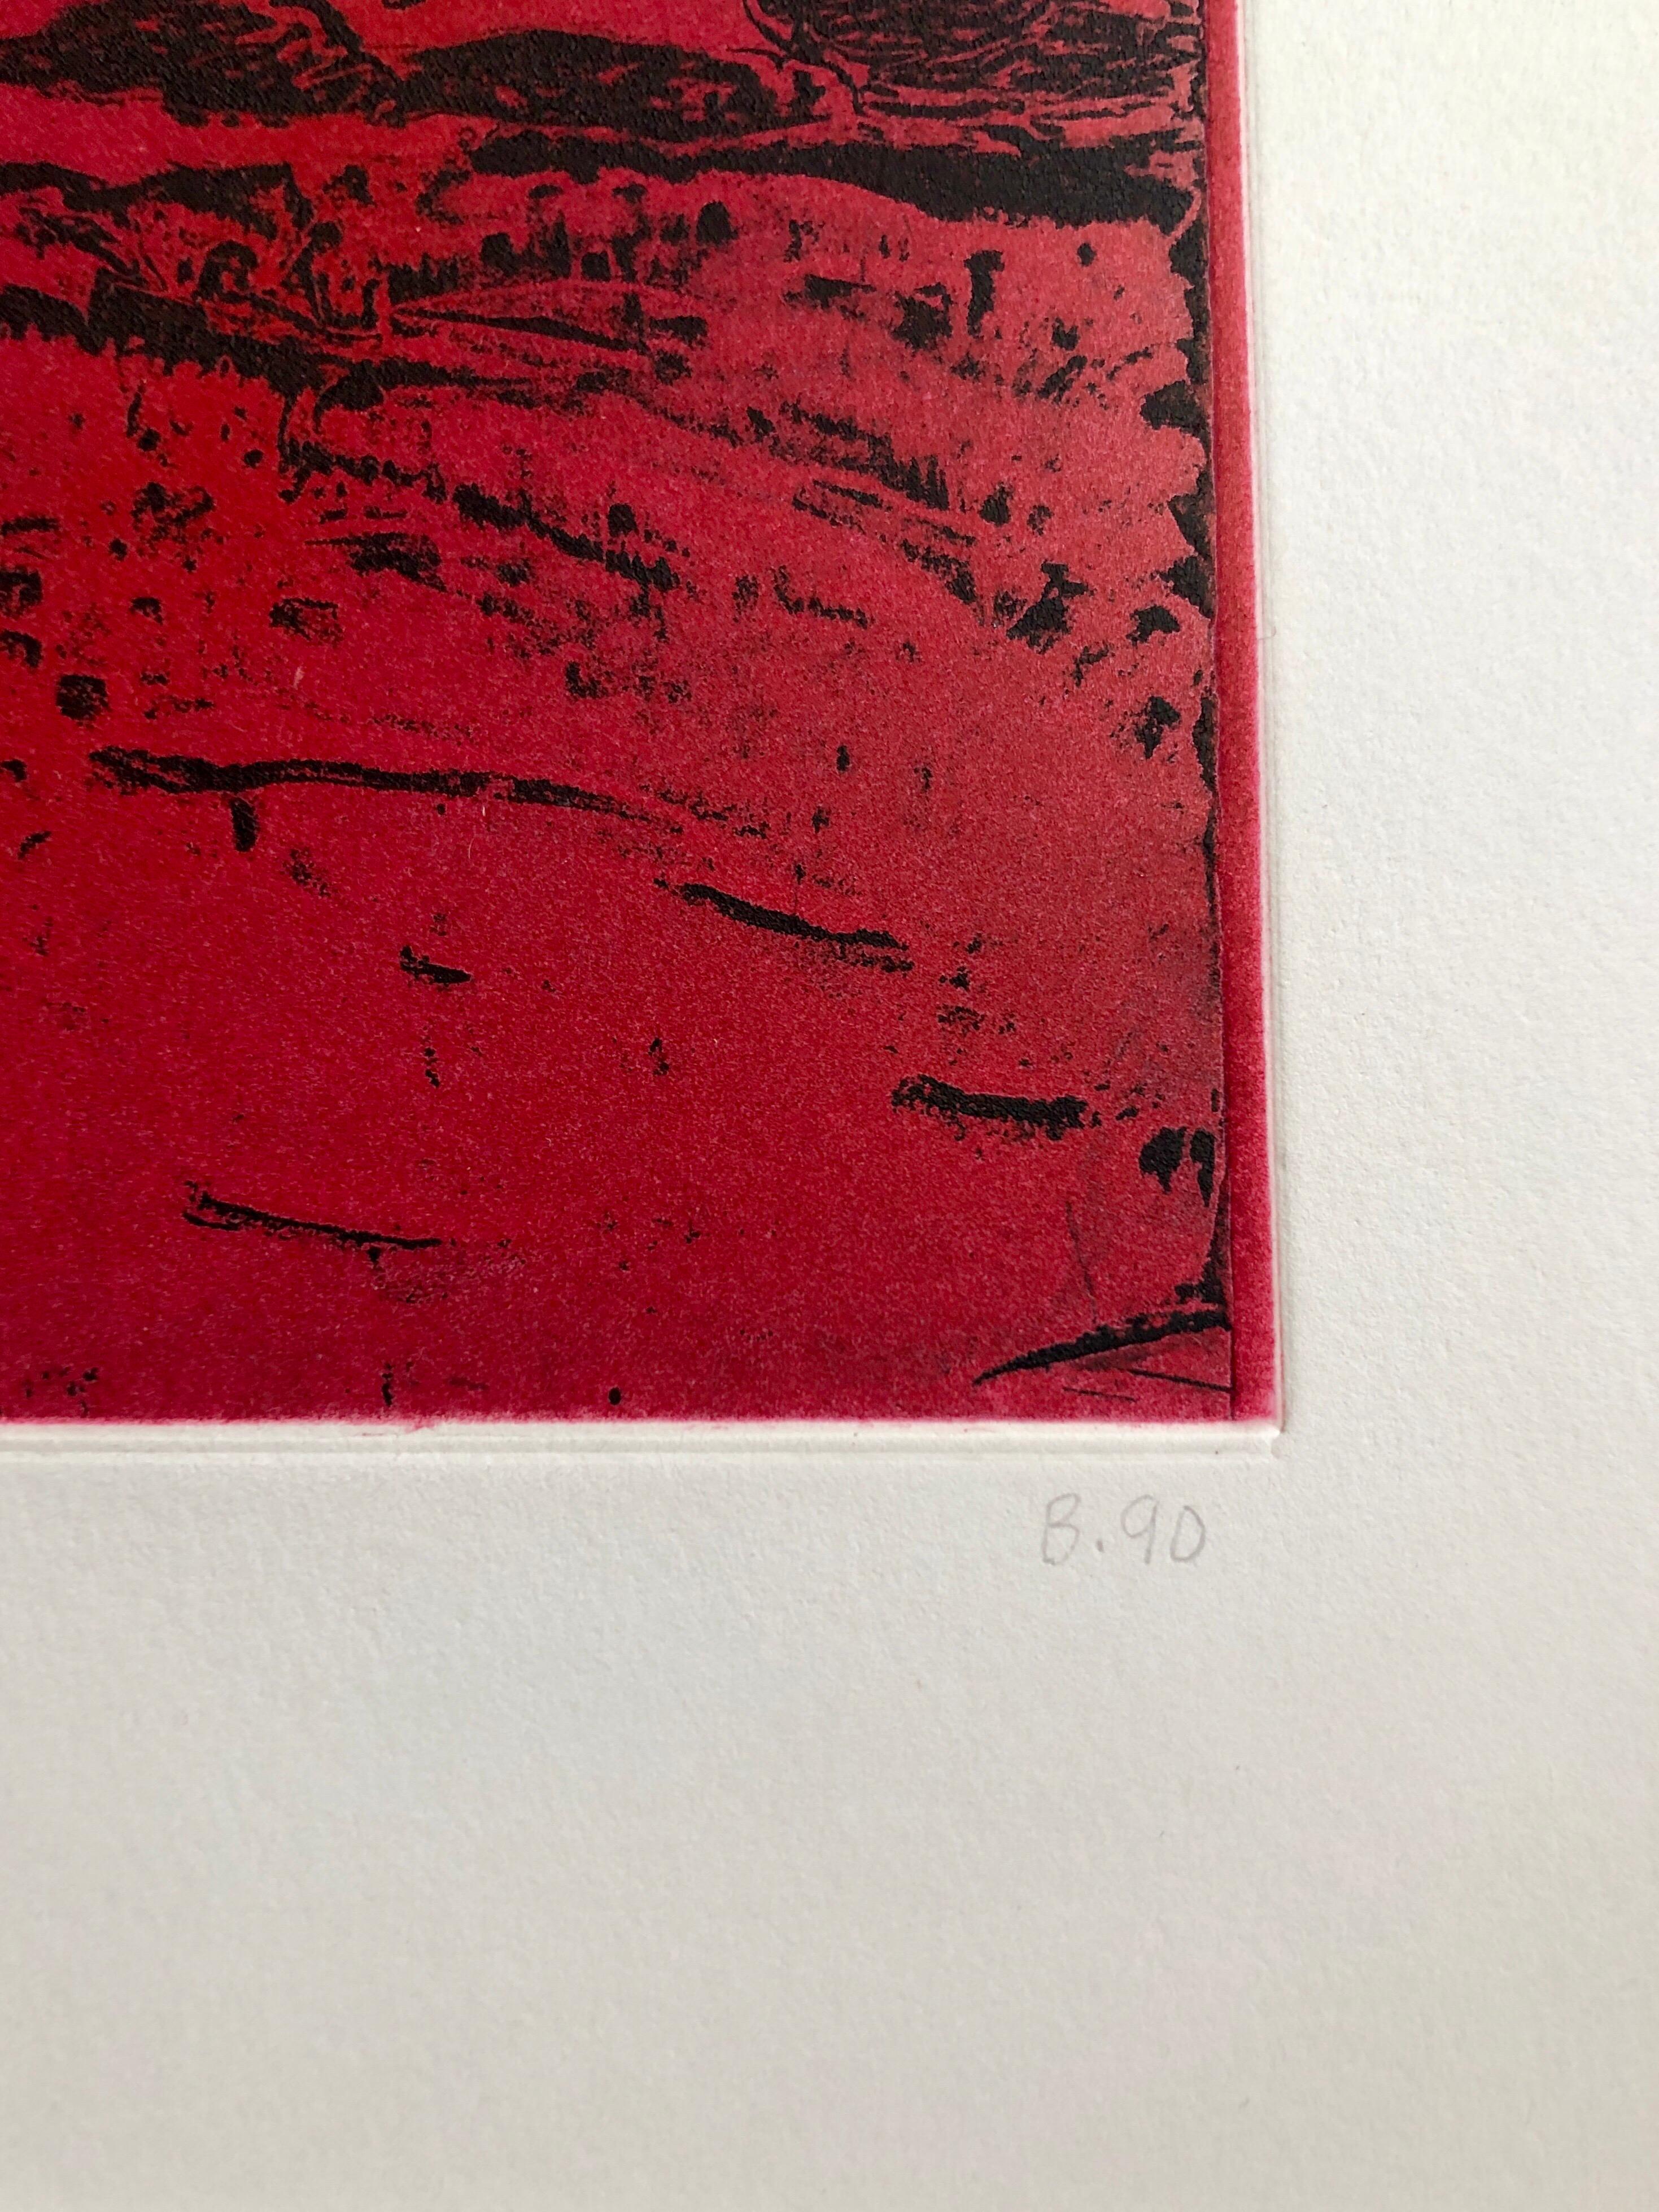 Untitled #11 Two Forms Red Ground Abstract Expressionist Aquatint Etching 3